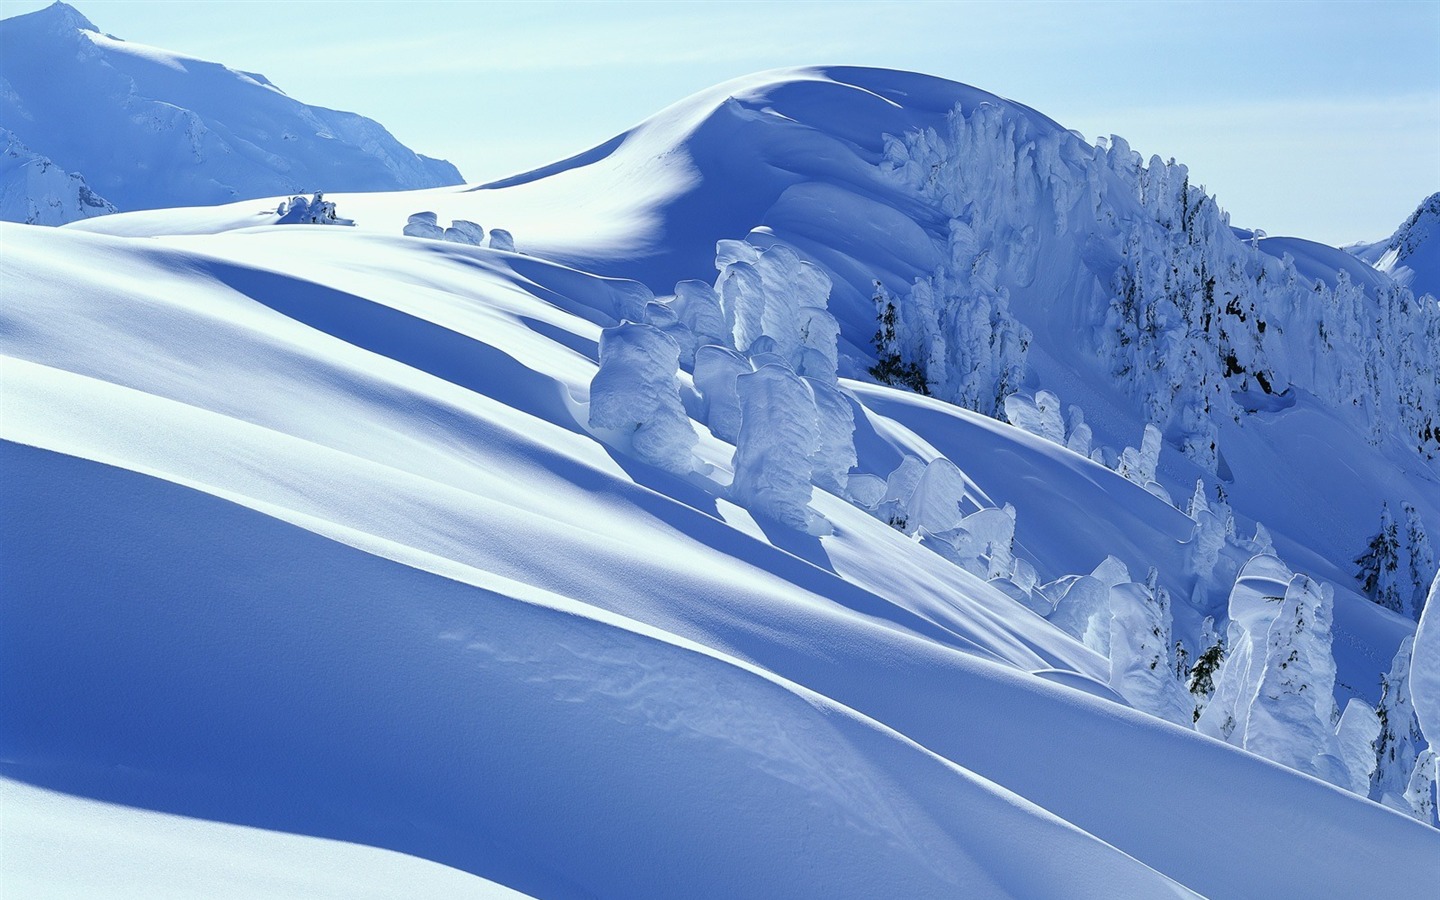 Snow wallpaper collection (2) #11 - 1440x900